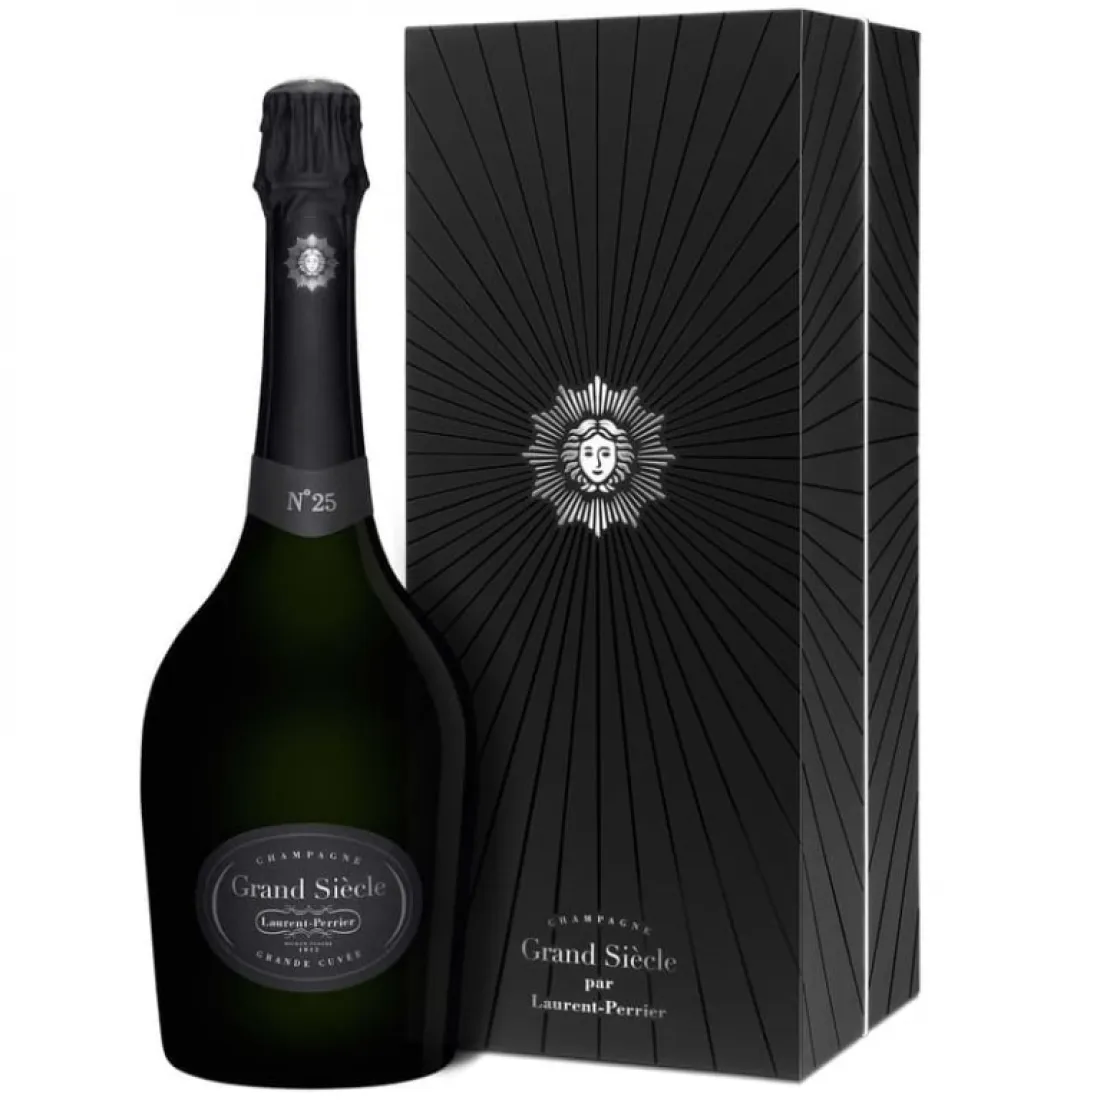 Expensive Grand Siècle Laurent Perrier No. 25 Champagne